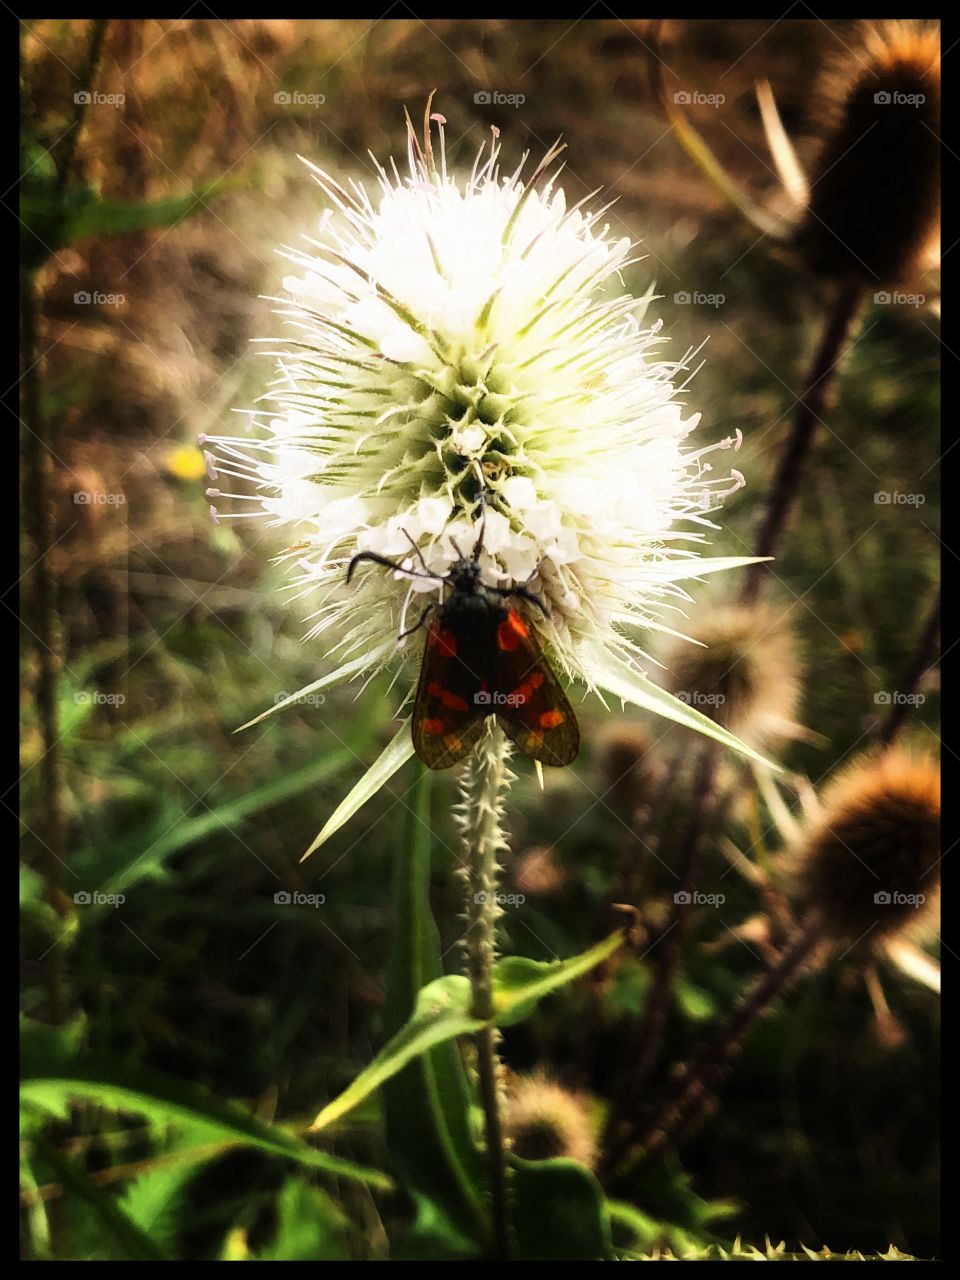 Insect and flower